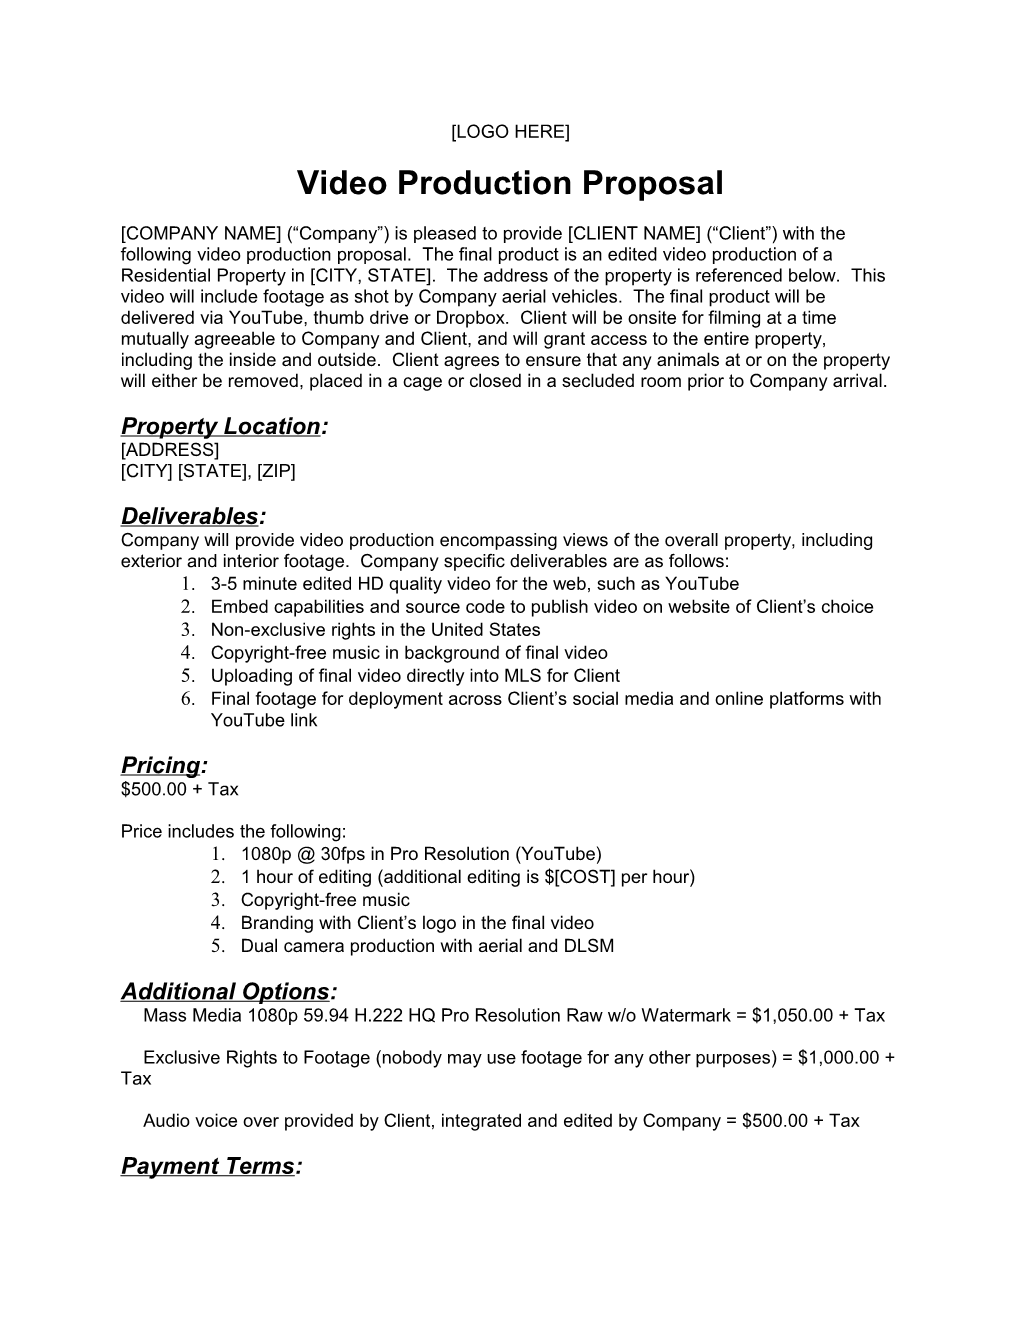 Video Production Proposal